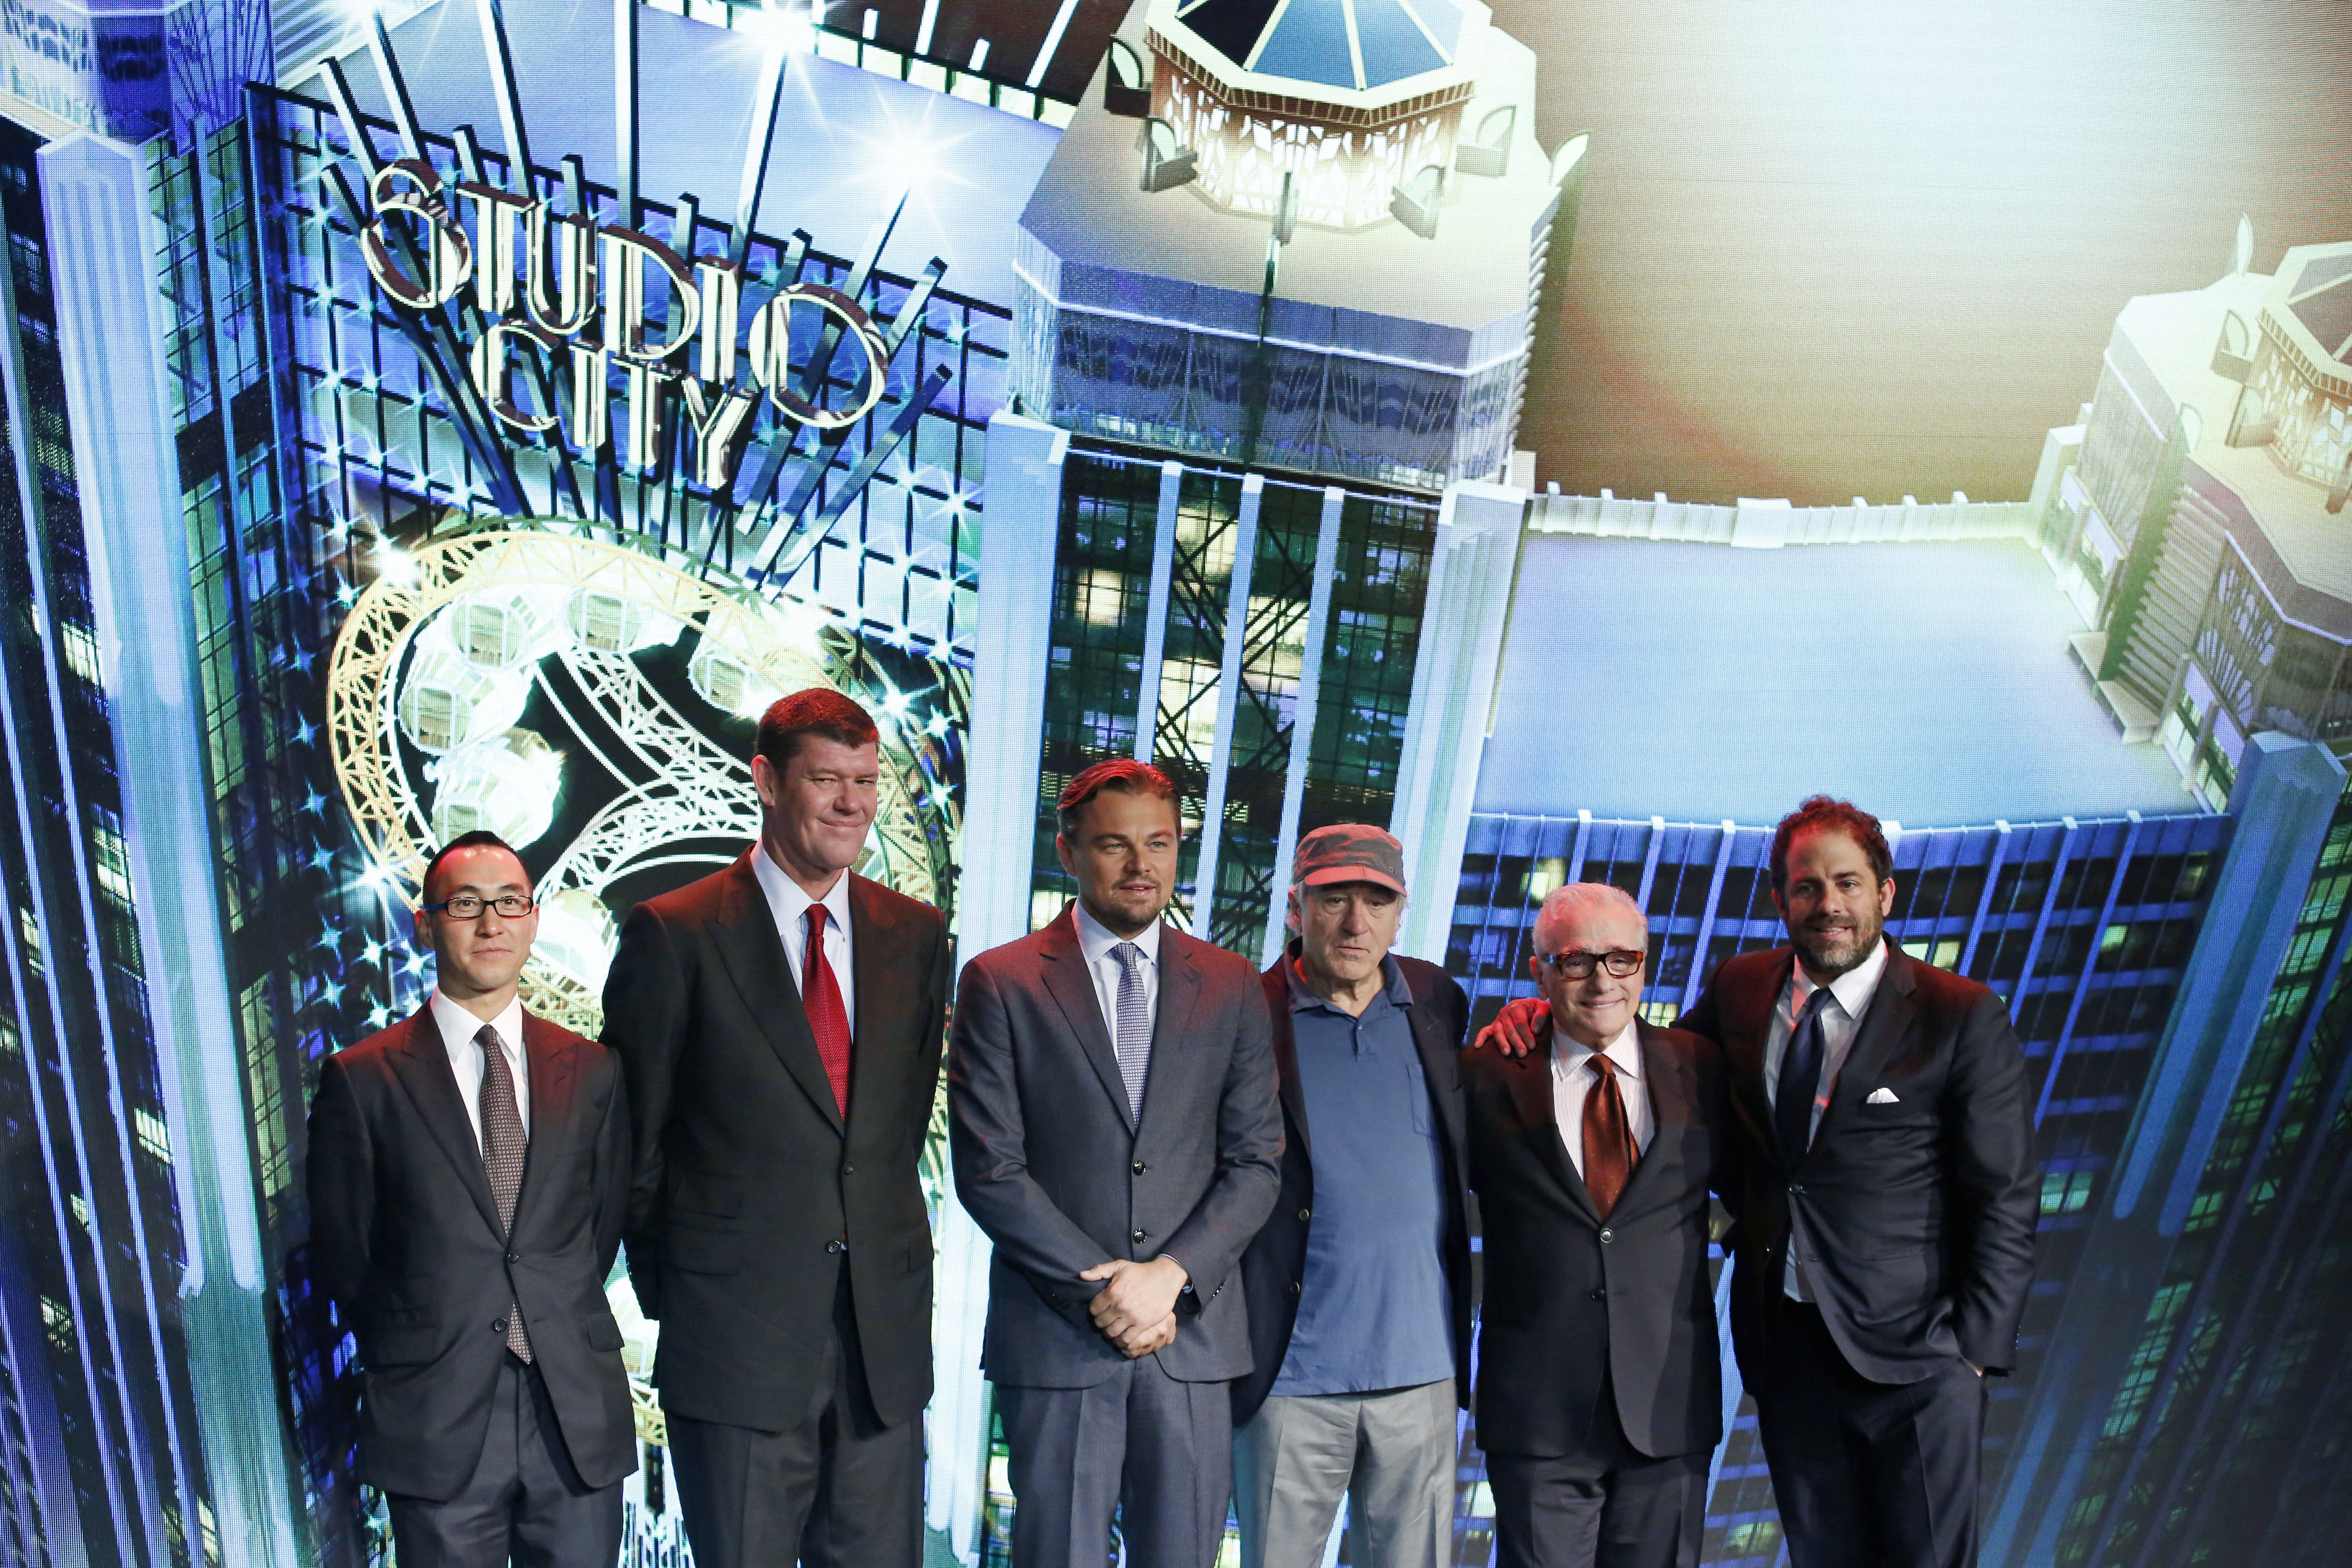 From left, Melco Crown Entertainment's co-chairman and chief executive officer Lawrence Ho and co-chairman James Packer pose with film stars Leonardo DiCaprio, Robert De Niro, director Martin Scorsese and producer Brett Ratner during a launch ceremony of the Studio City project in Macau, Tuesday, Oct. 27, 2015. China's world-beating gambling hub is getting a taste of Hollywood glamor as its newest casino resort makes its debut on Tuesday with a glitzy grand opening that masks turmoil behind the scenes. (AP Photo/Kin Cheung)